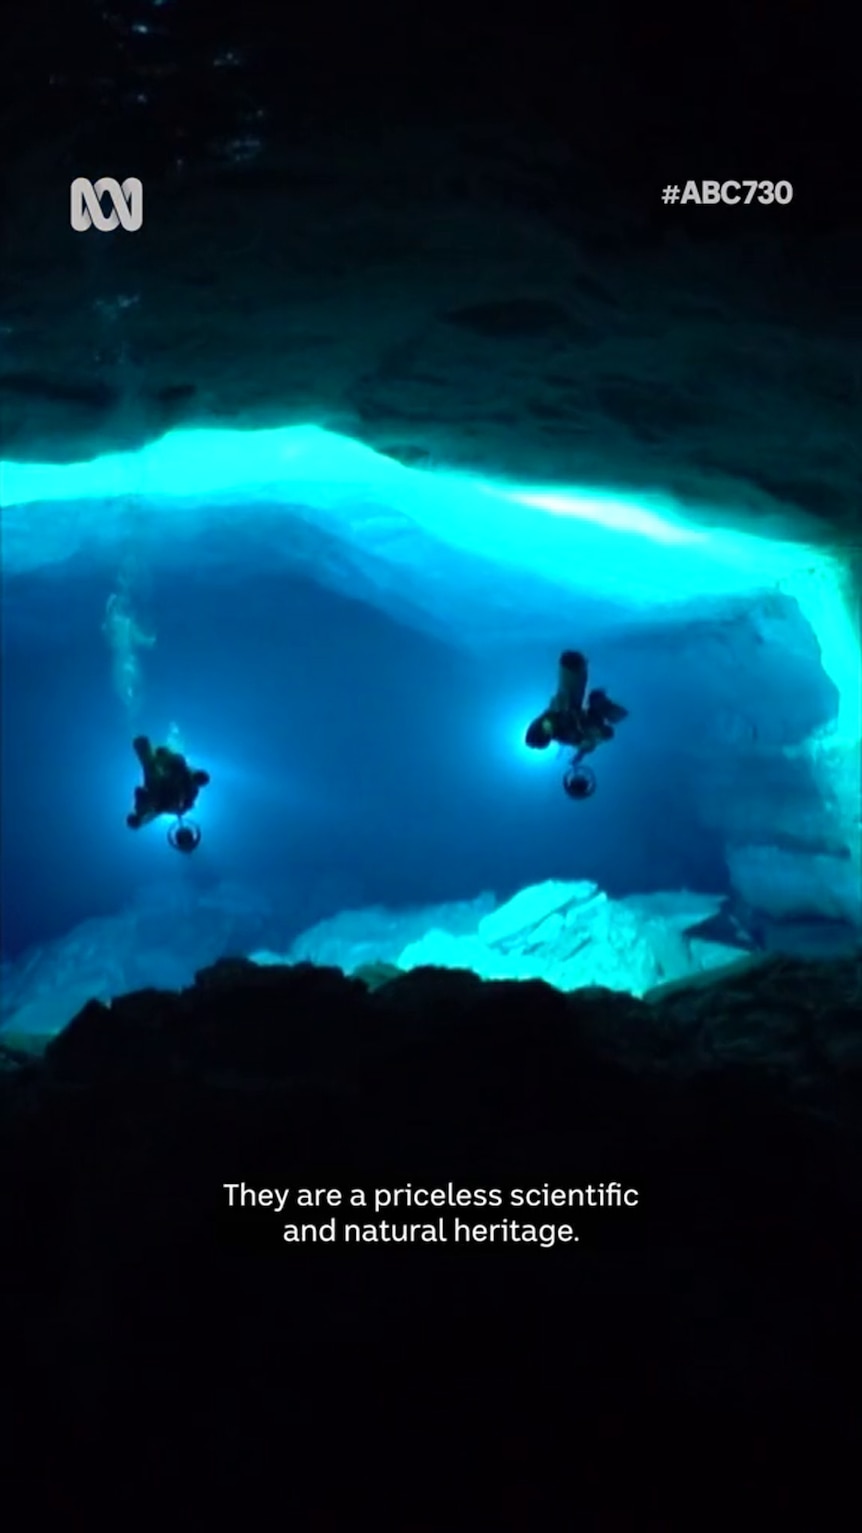 An underwater cave filled with blue-coloured water hosts two dark figures in diving gear